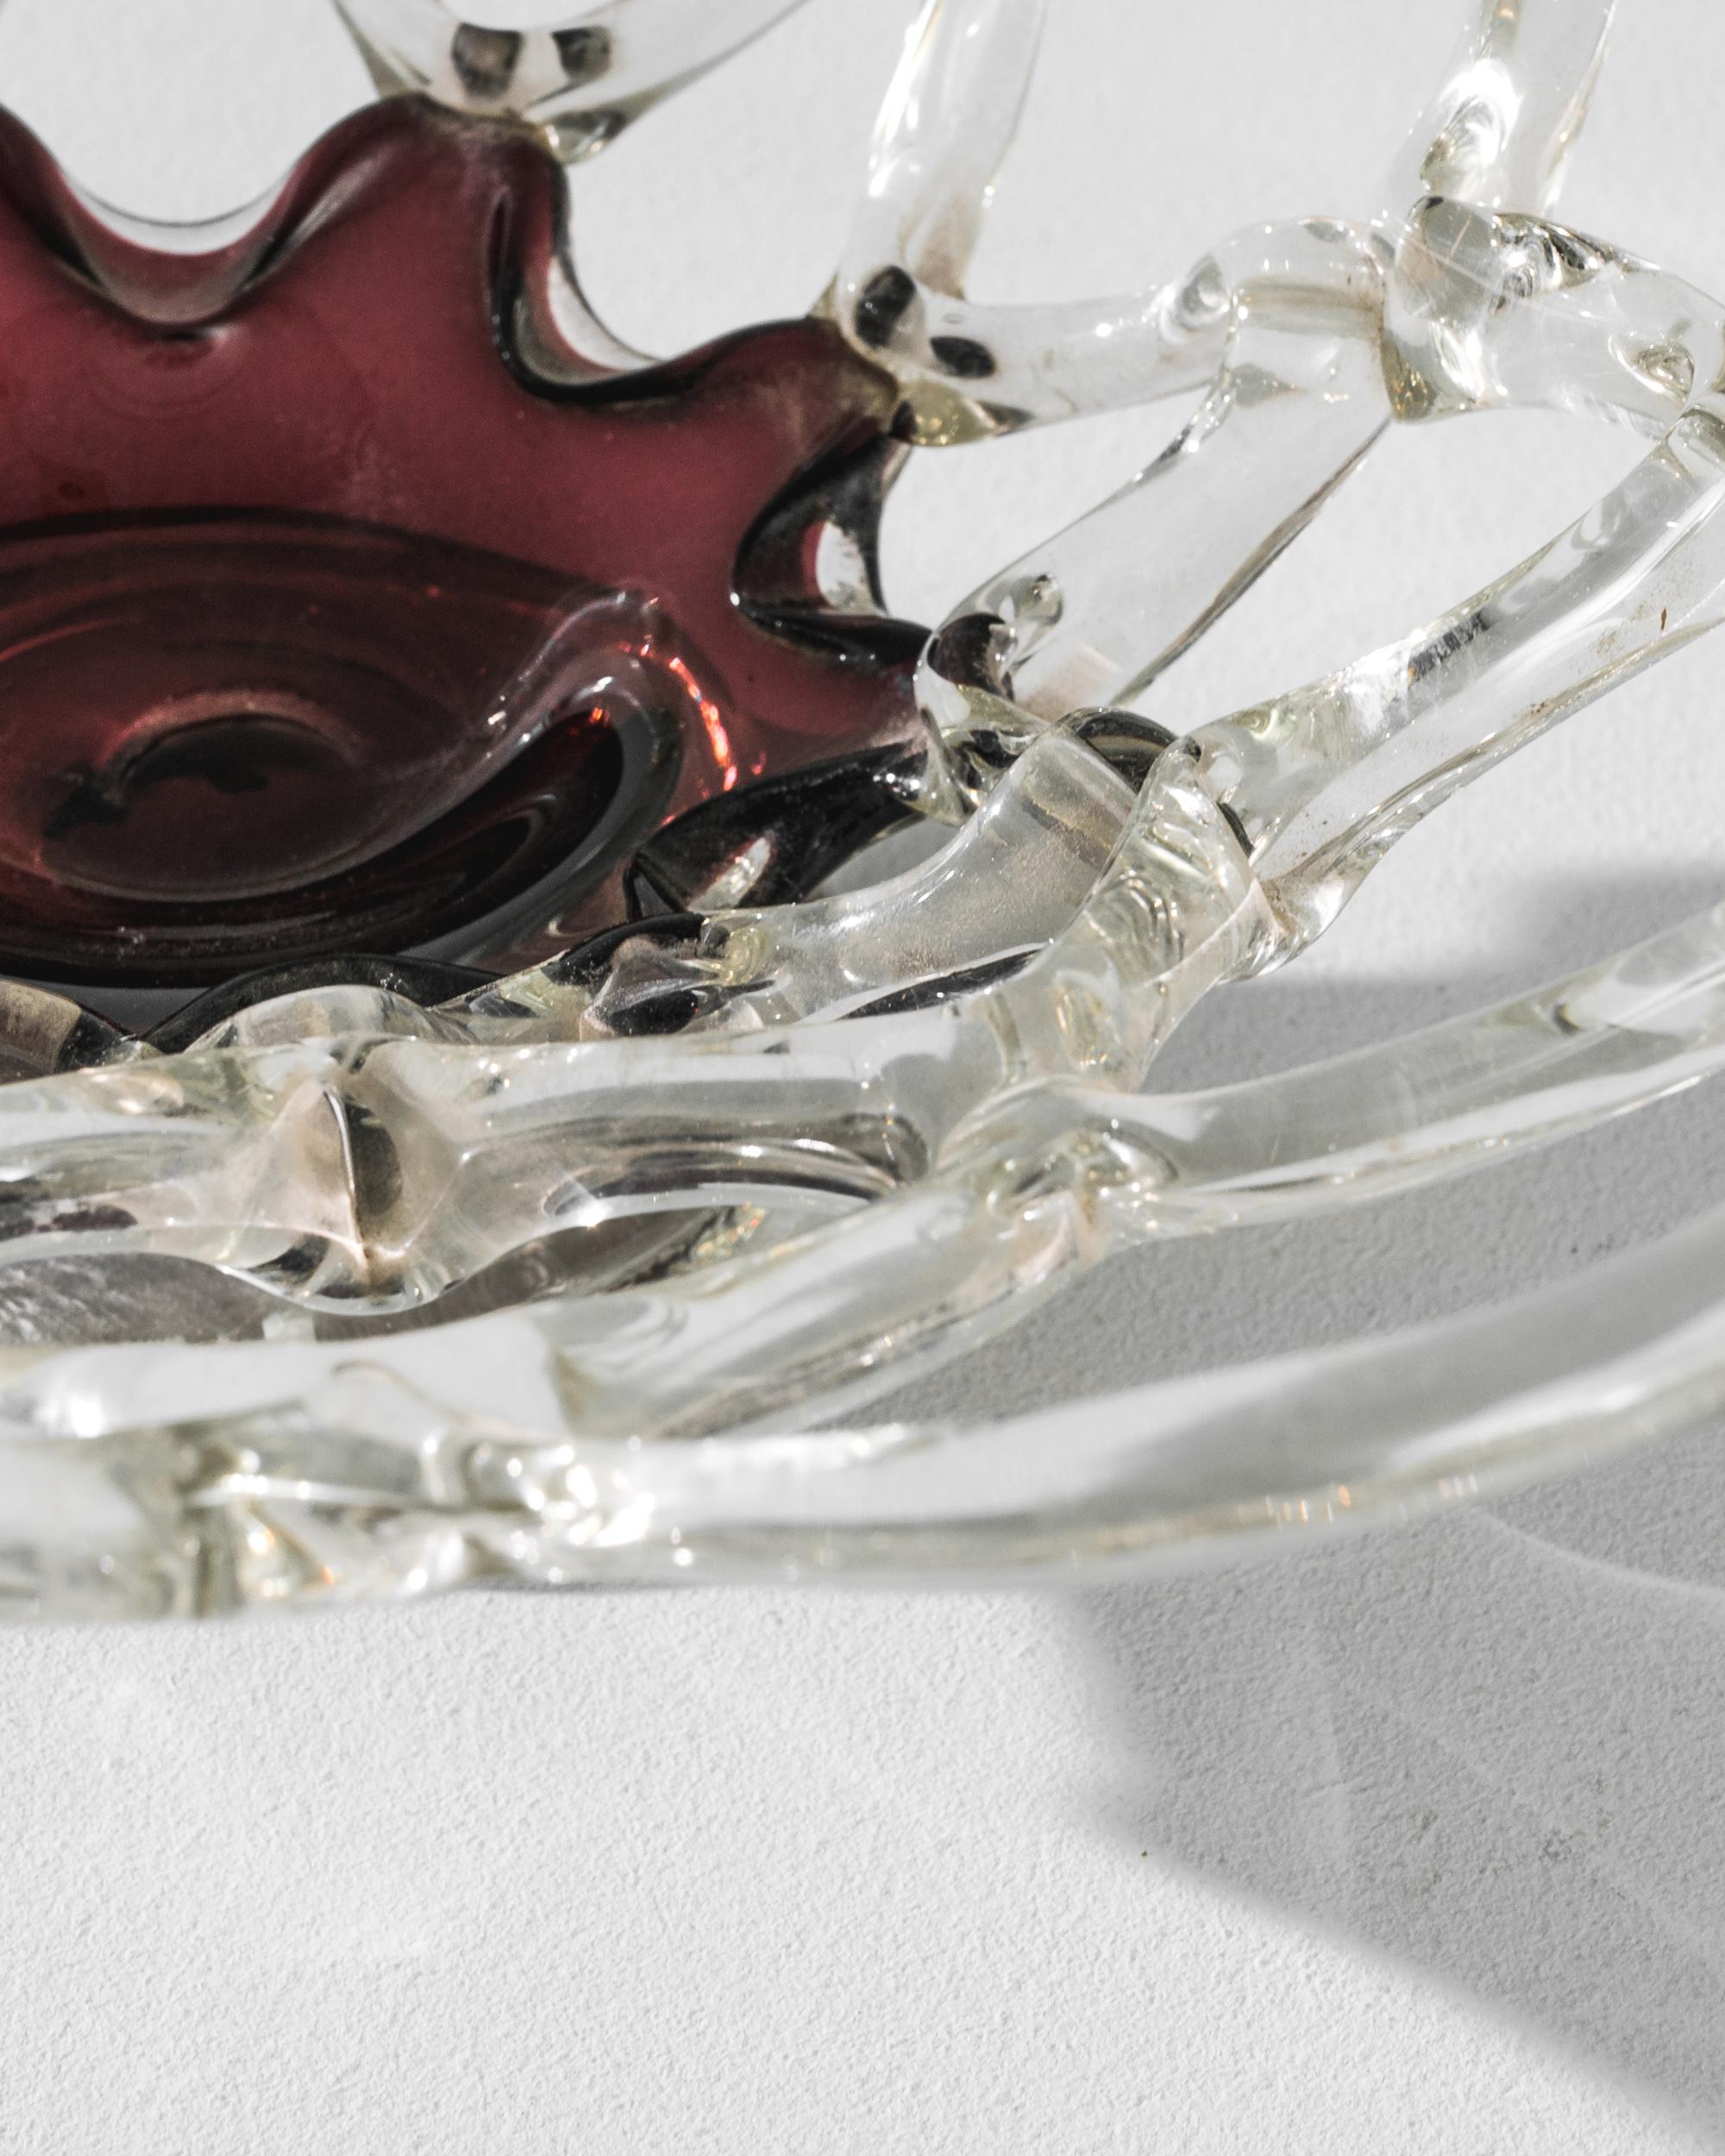 This vintage openwork glass bowl was produced in Belgium, circa 1930. Aerial yet stable, this handblown tour-de-force stands delicately on its base, blooming to reveal a red heart in a raspberry sirup shade. Around its core, the interwoven alveolus